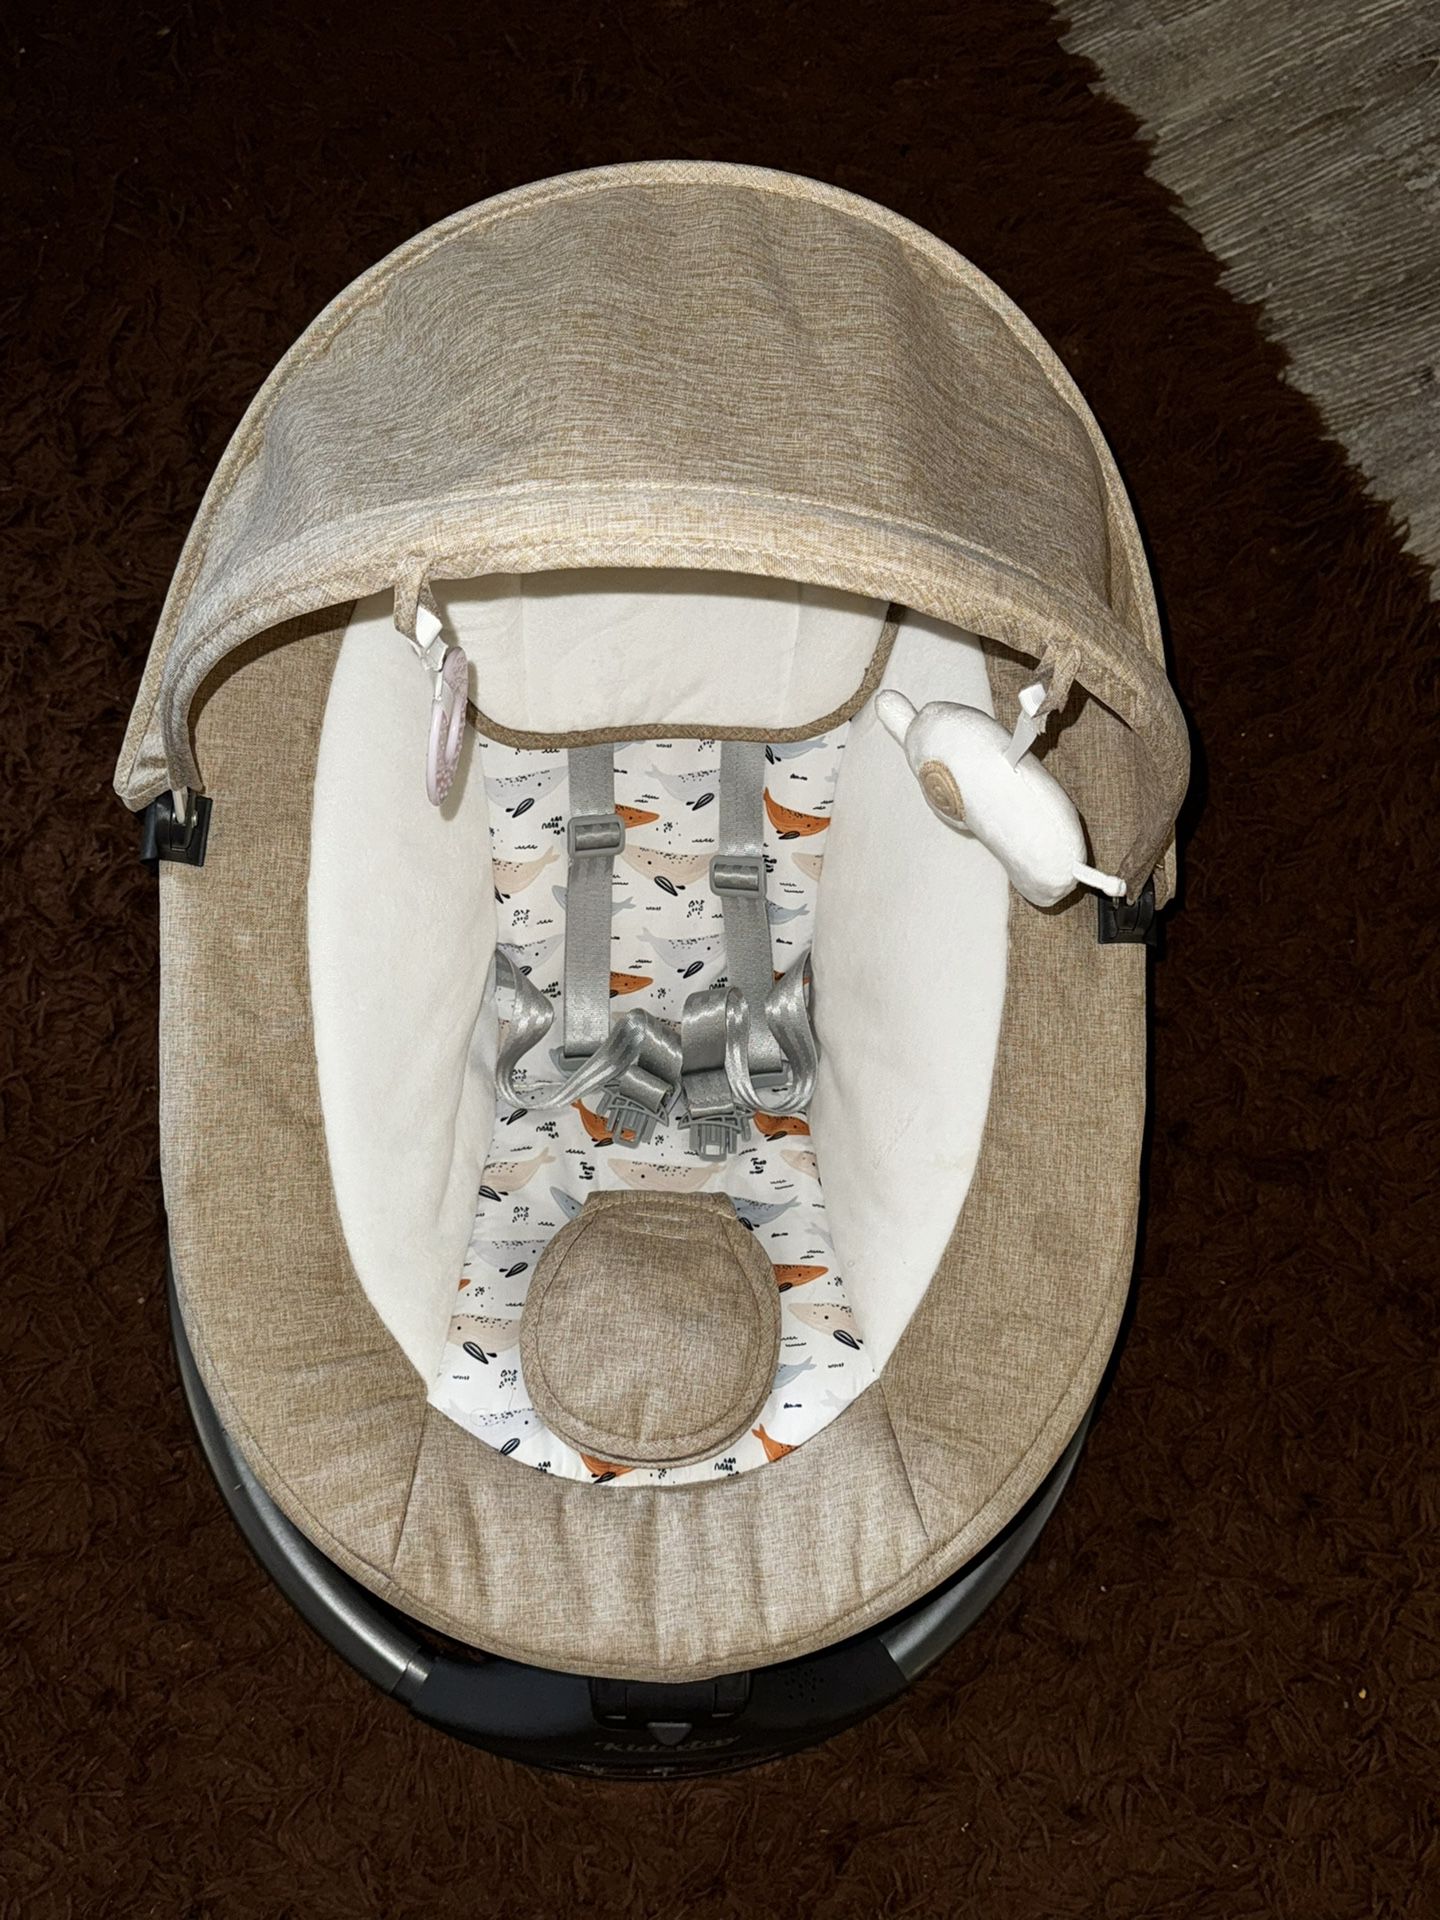 BRAND NEW BABY SWING WITH MANY FEATURES!